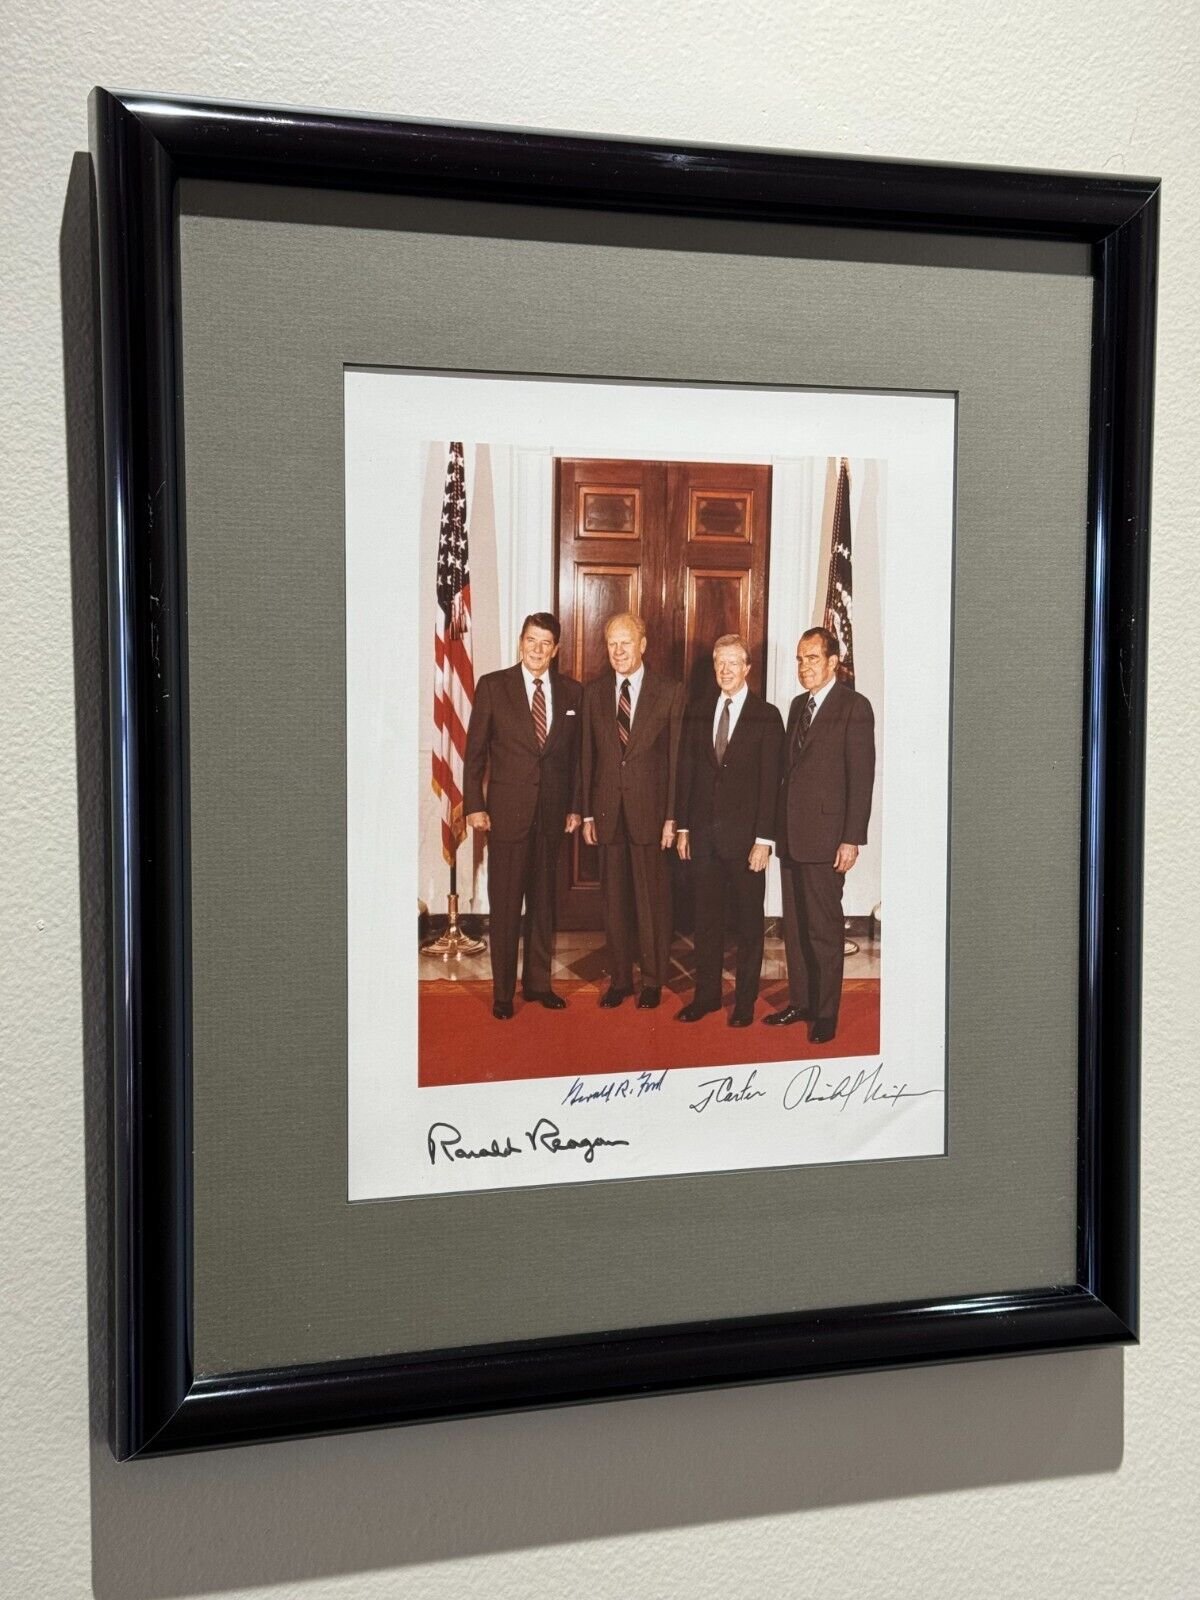 Rare photo signed by 4 US Presidents Reagan, Ford, Carter, Nixon